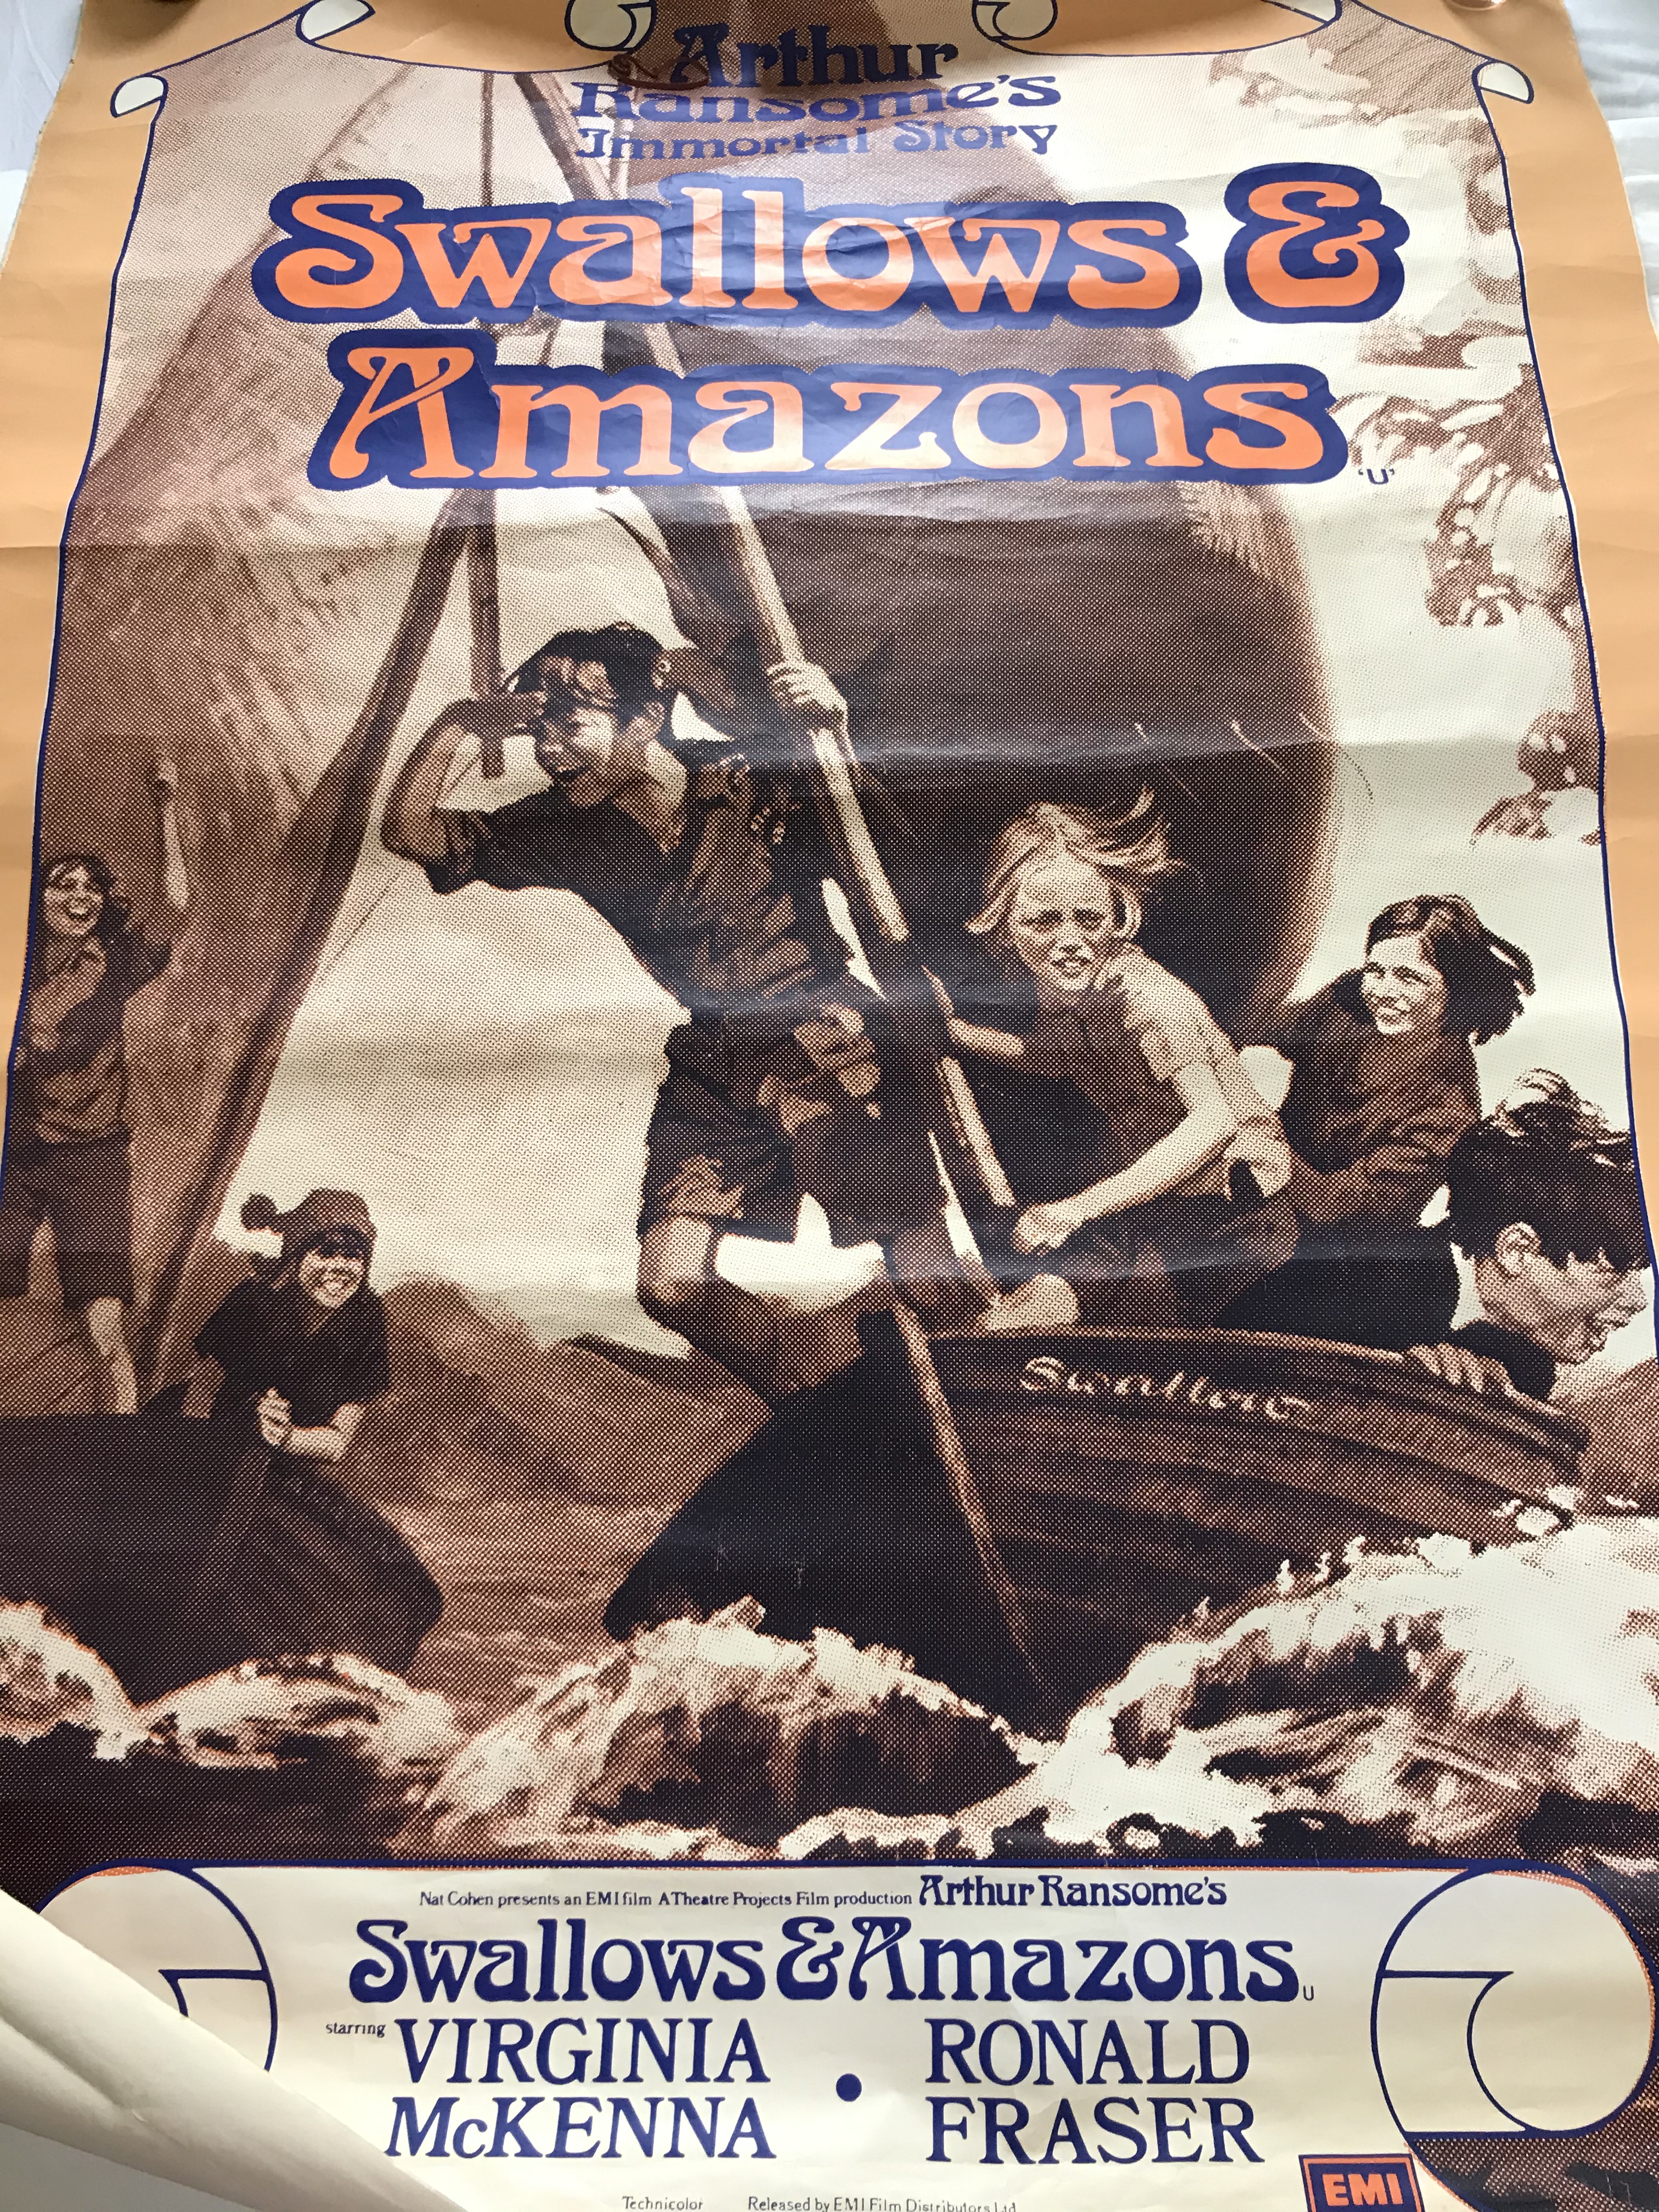 Swallows and Amazons (1974) sepia film poster (c) StudioCanal